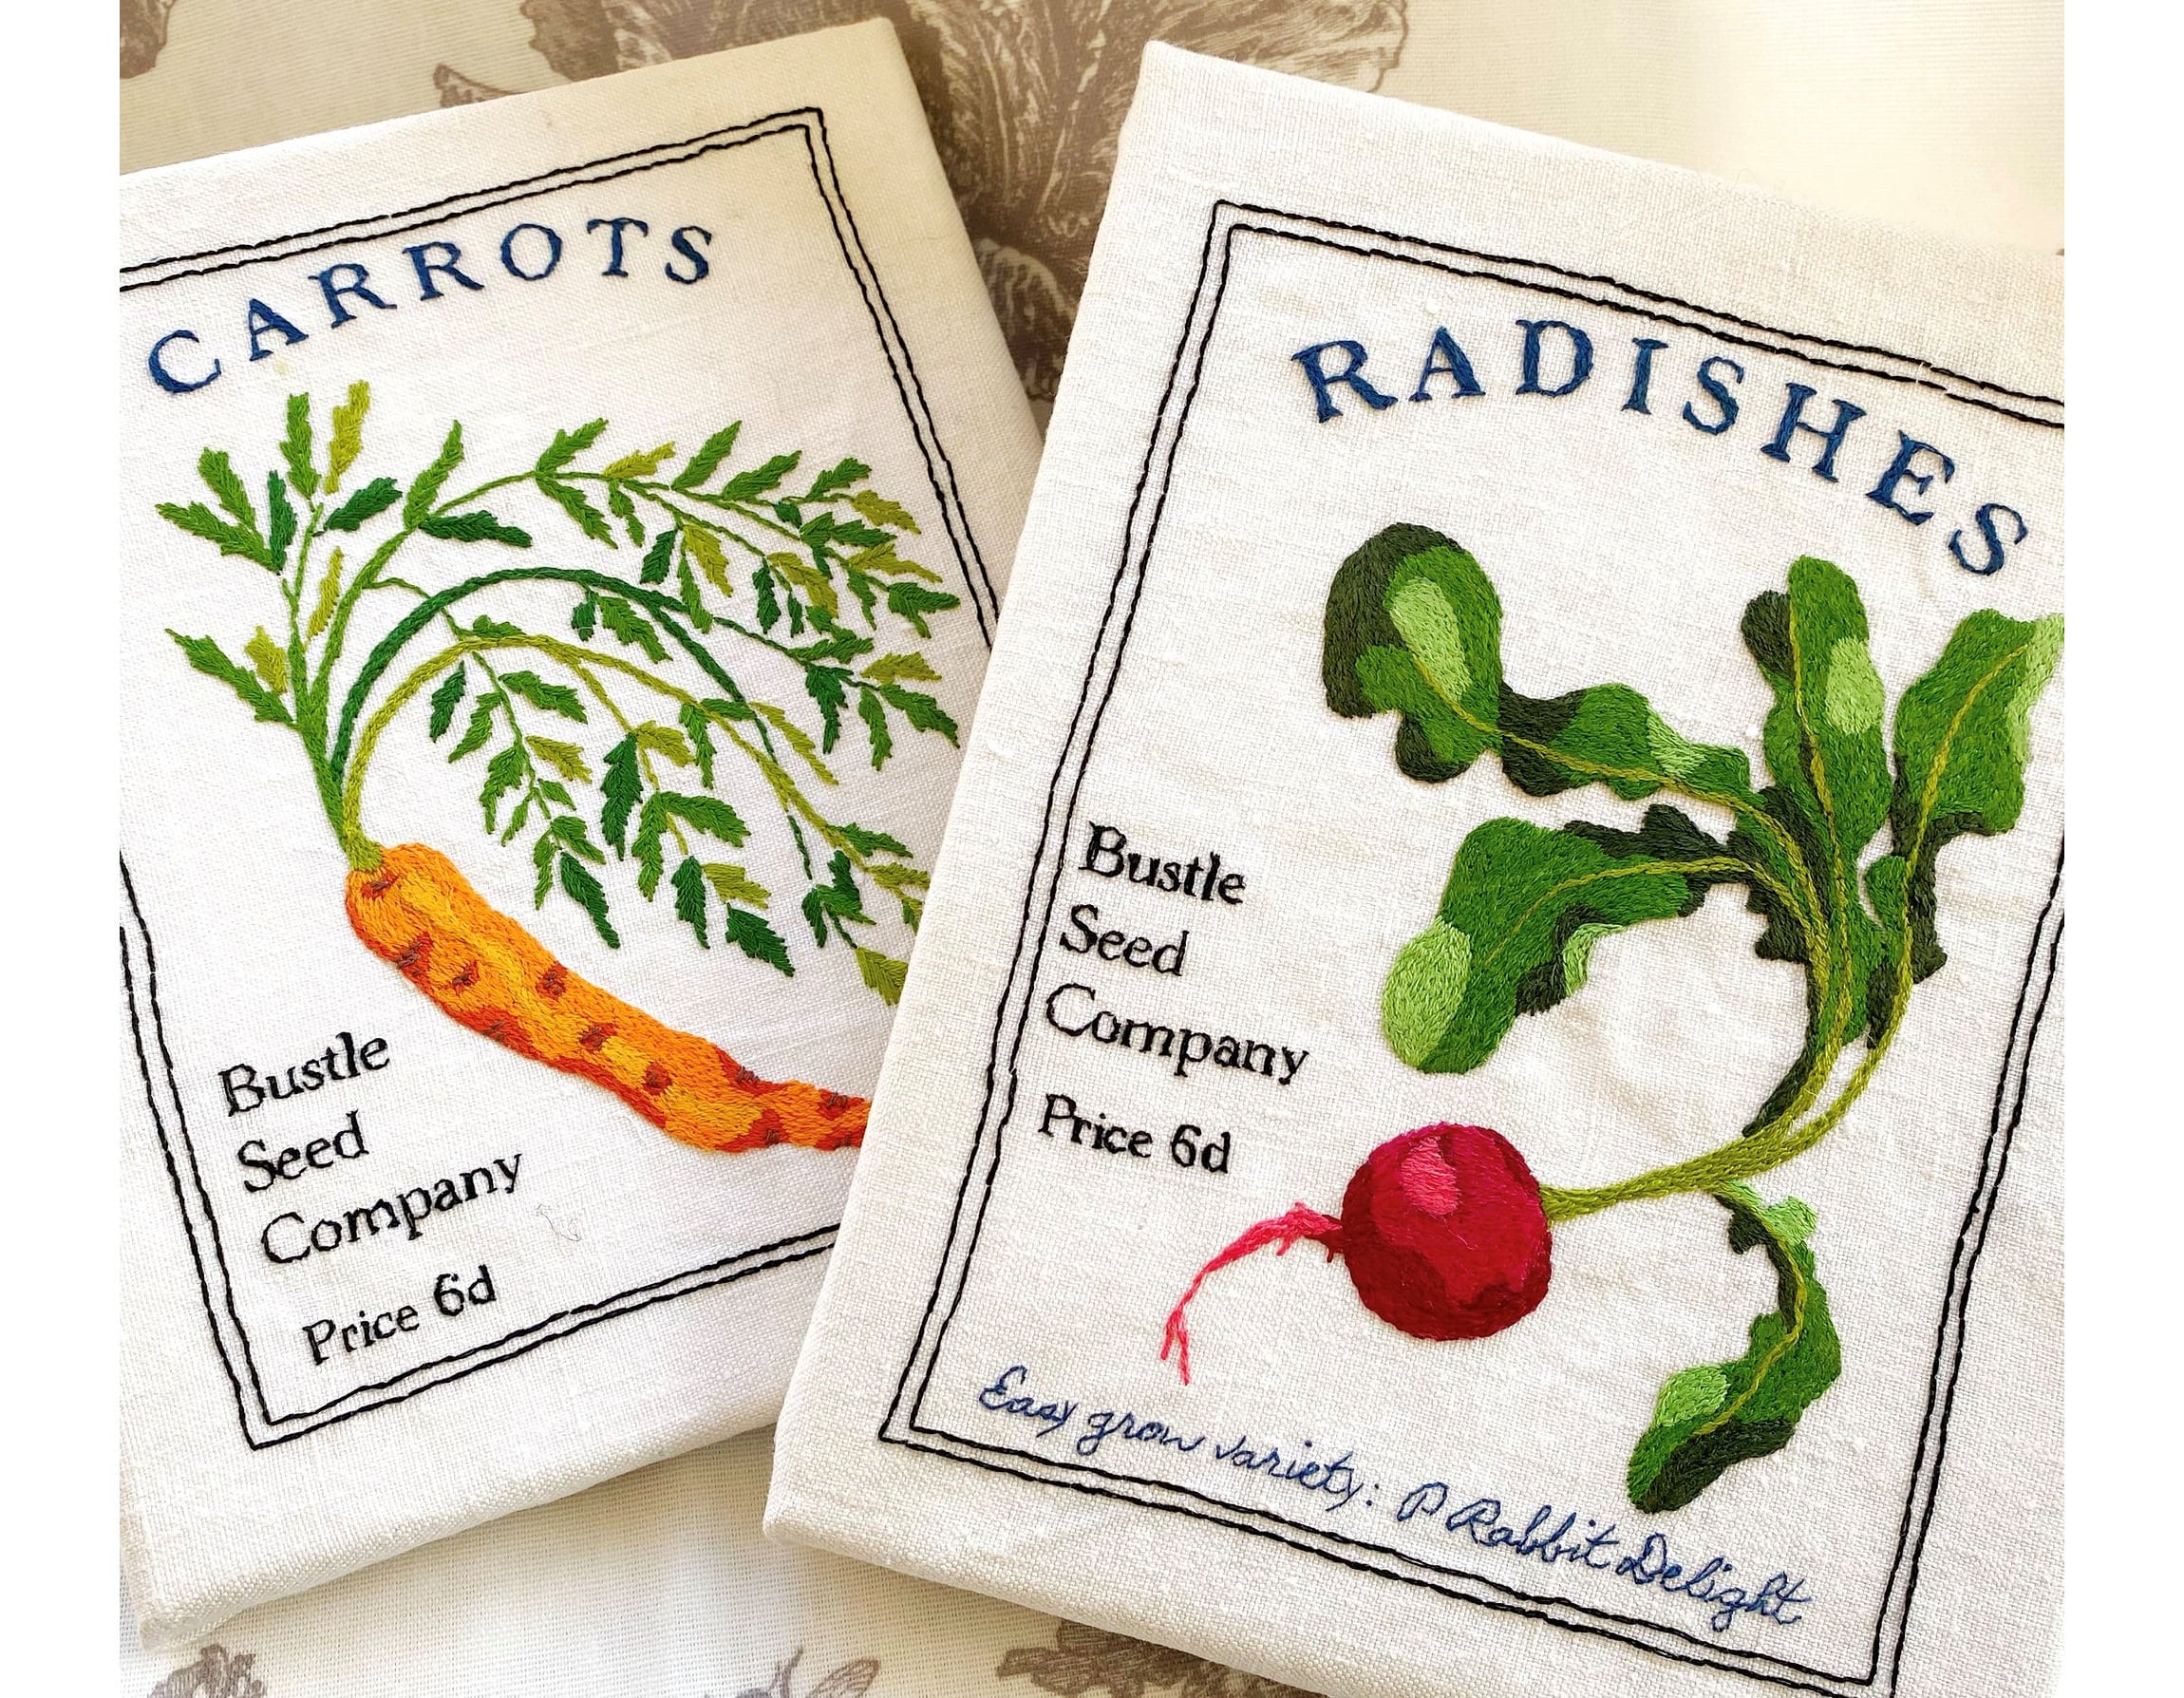 Antique Vegetable Seed Packets, Sticker Sheet, Vintage Seed Packs, Garden  Greenhouse Sign, Rustic Garden Shed, Victorian Ephemera Paper, 617 